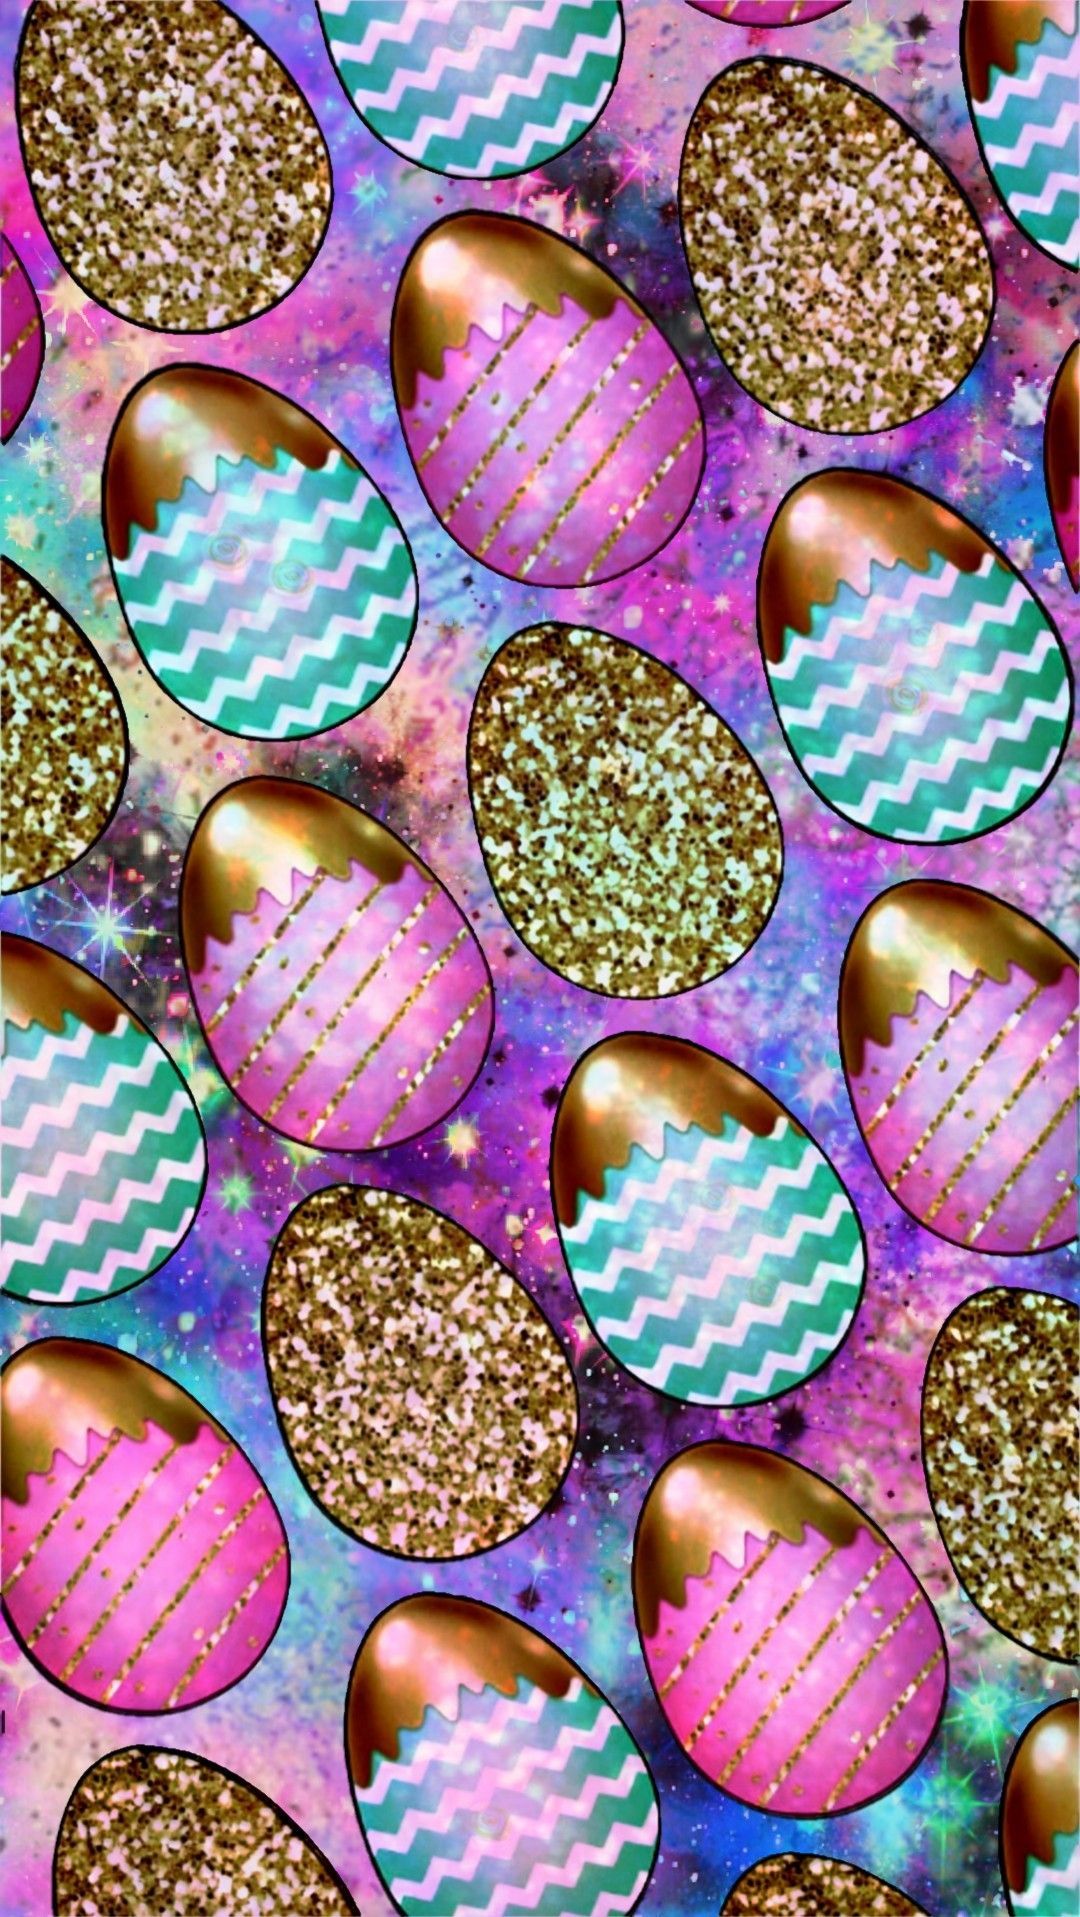 Galaxy Easter Eggs, made by me #patterns #colorful #glitter #background # wallpaper #sparkles #glittery #galaxy. Easter wallpaper, Glitter wallpaper, Wallpaper